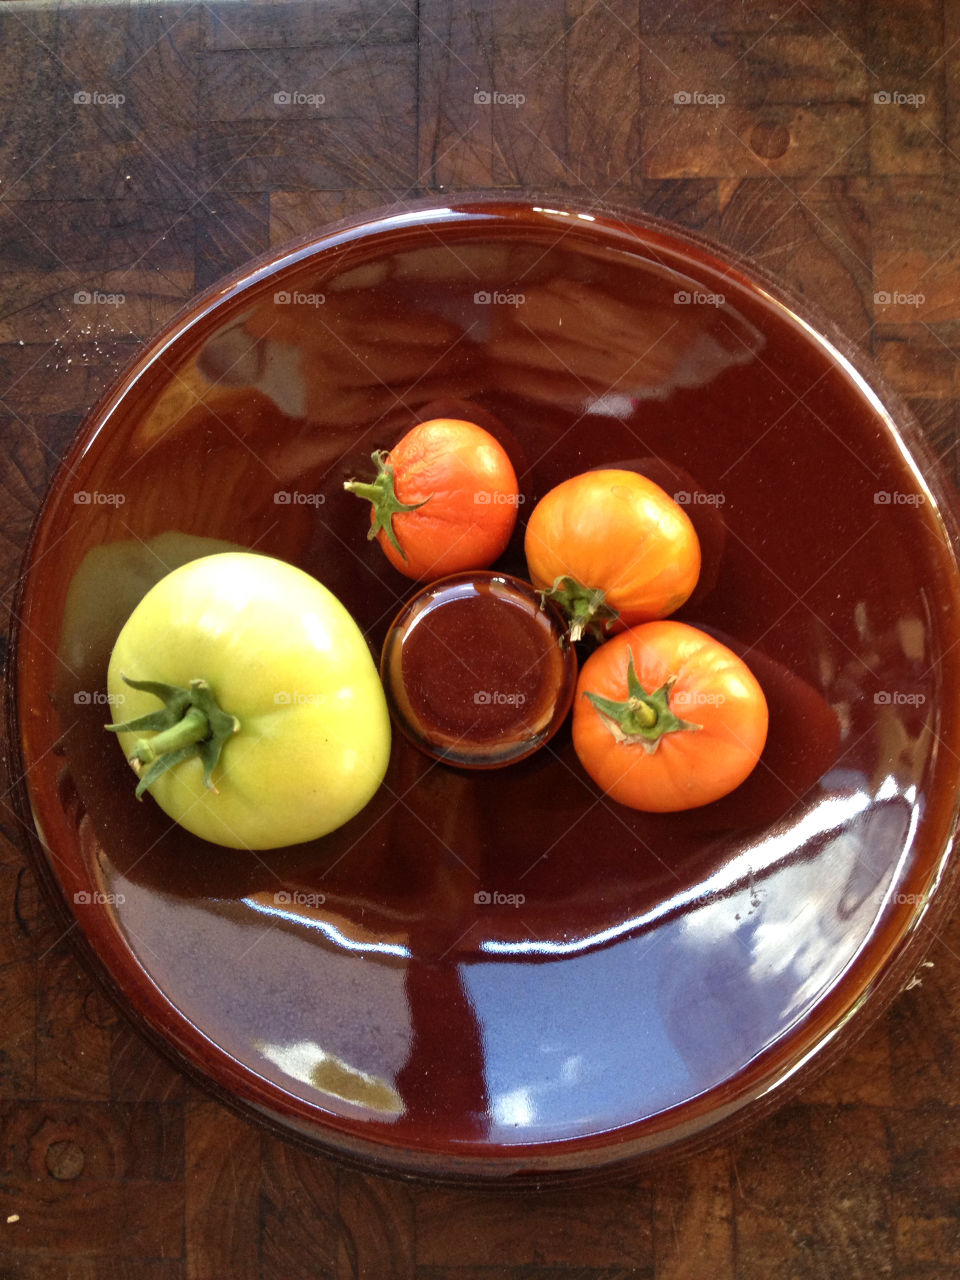 Four tomatoes in a bowl